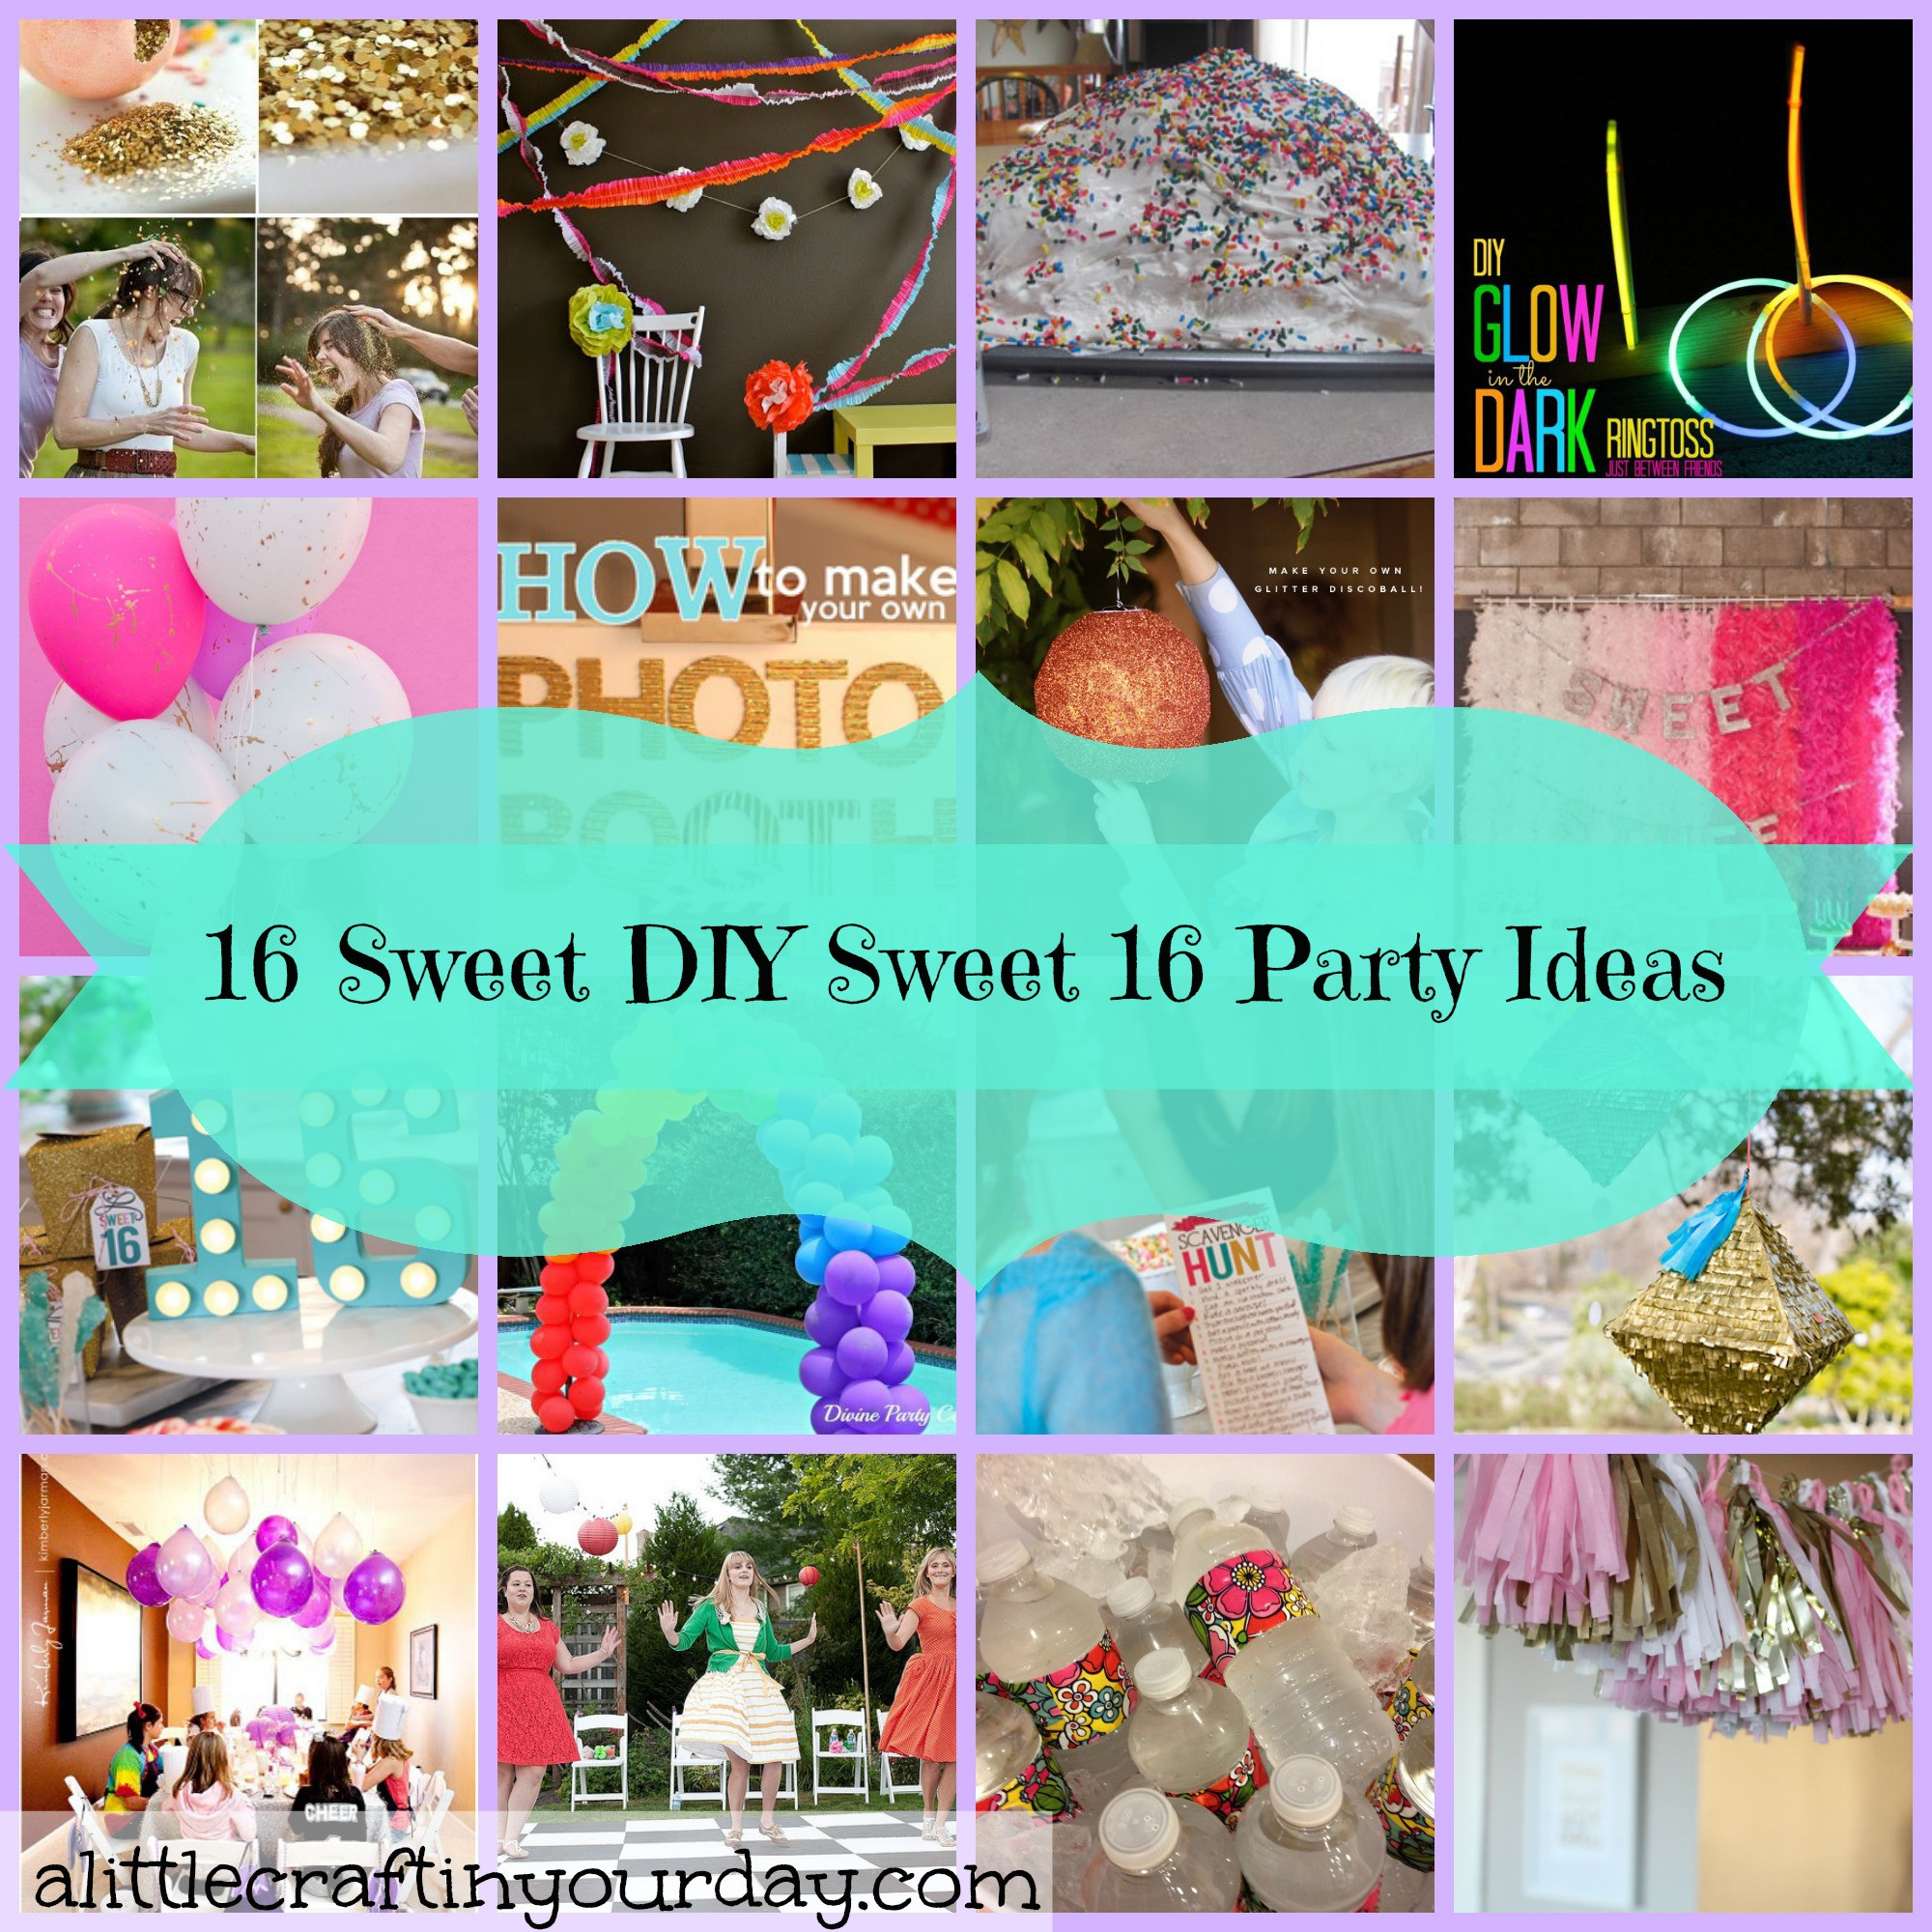 Summer Sweet 16 Party Ideas
 Sweet Sixteen Party Ideas to Favor